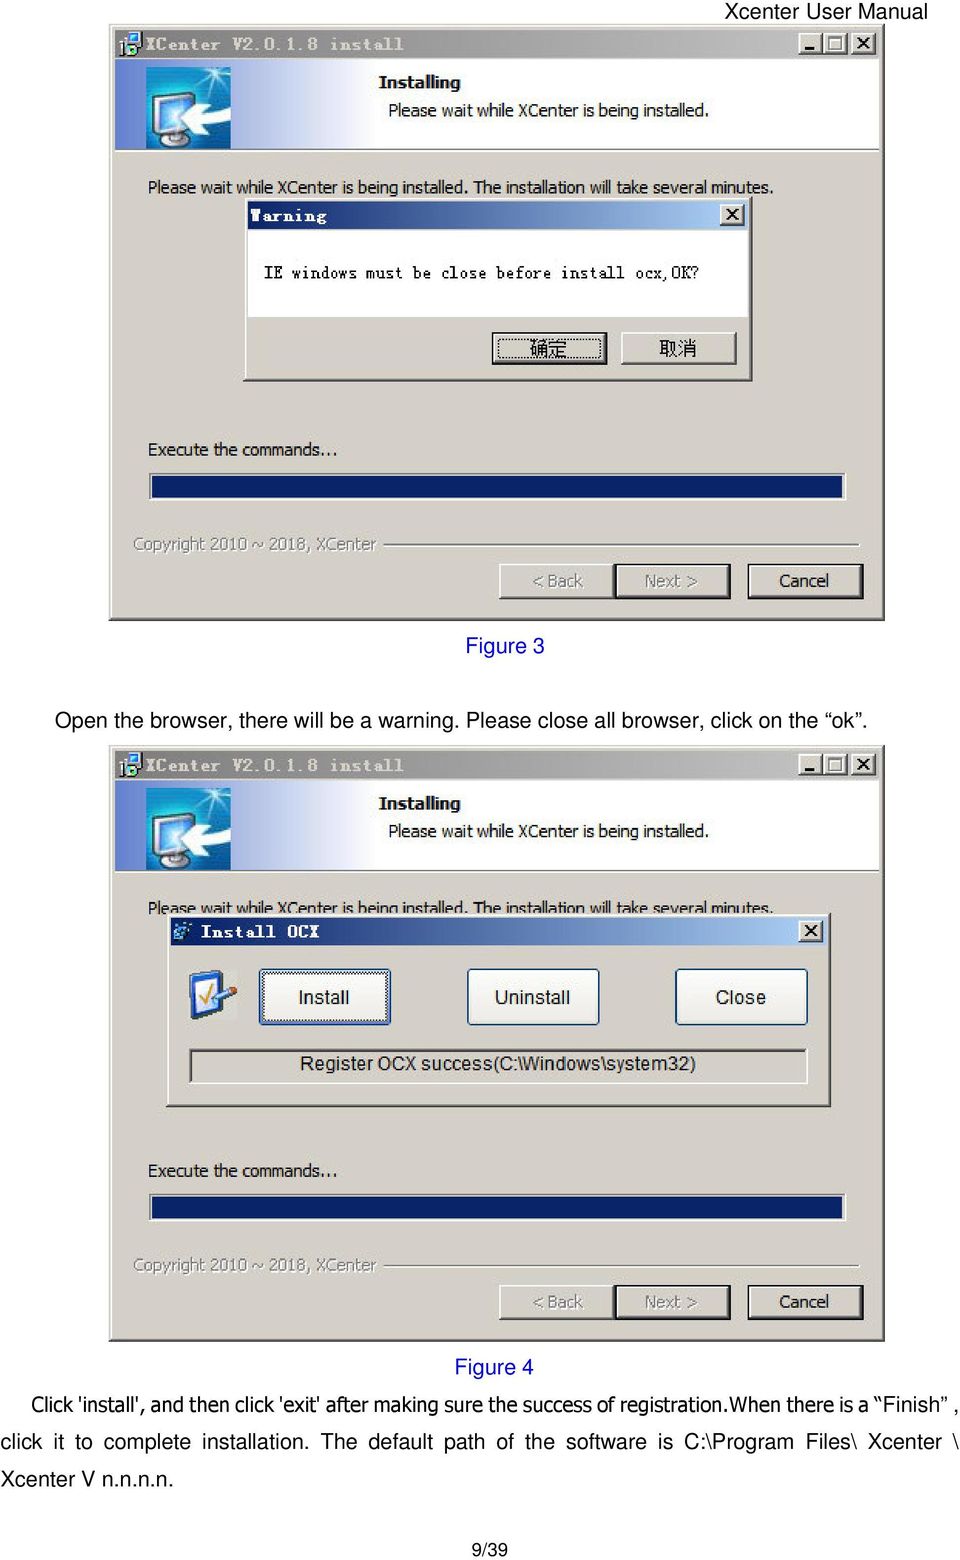 Figure 4 Finish, click it to complete installation.